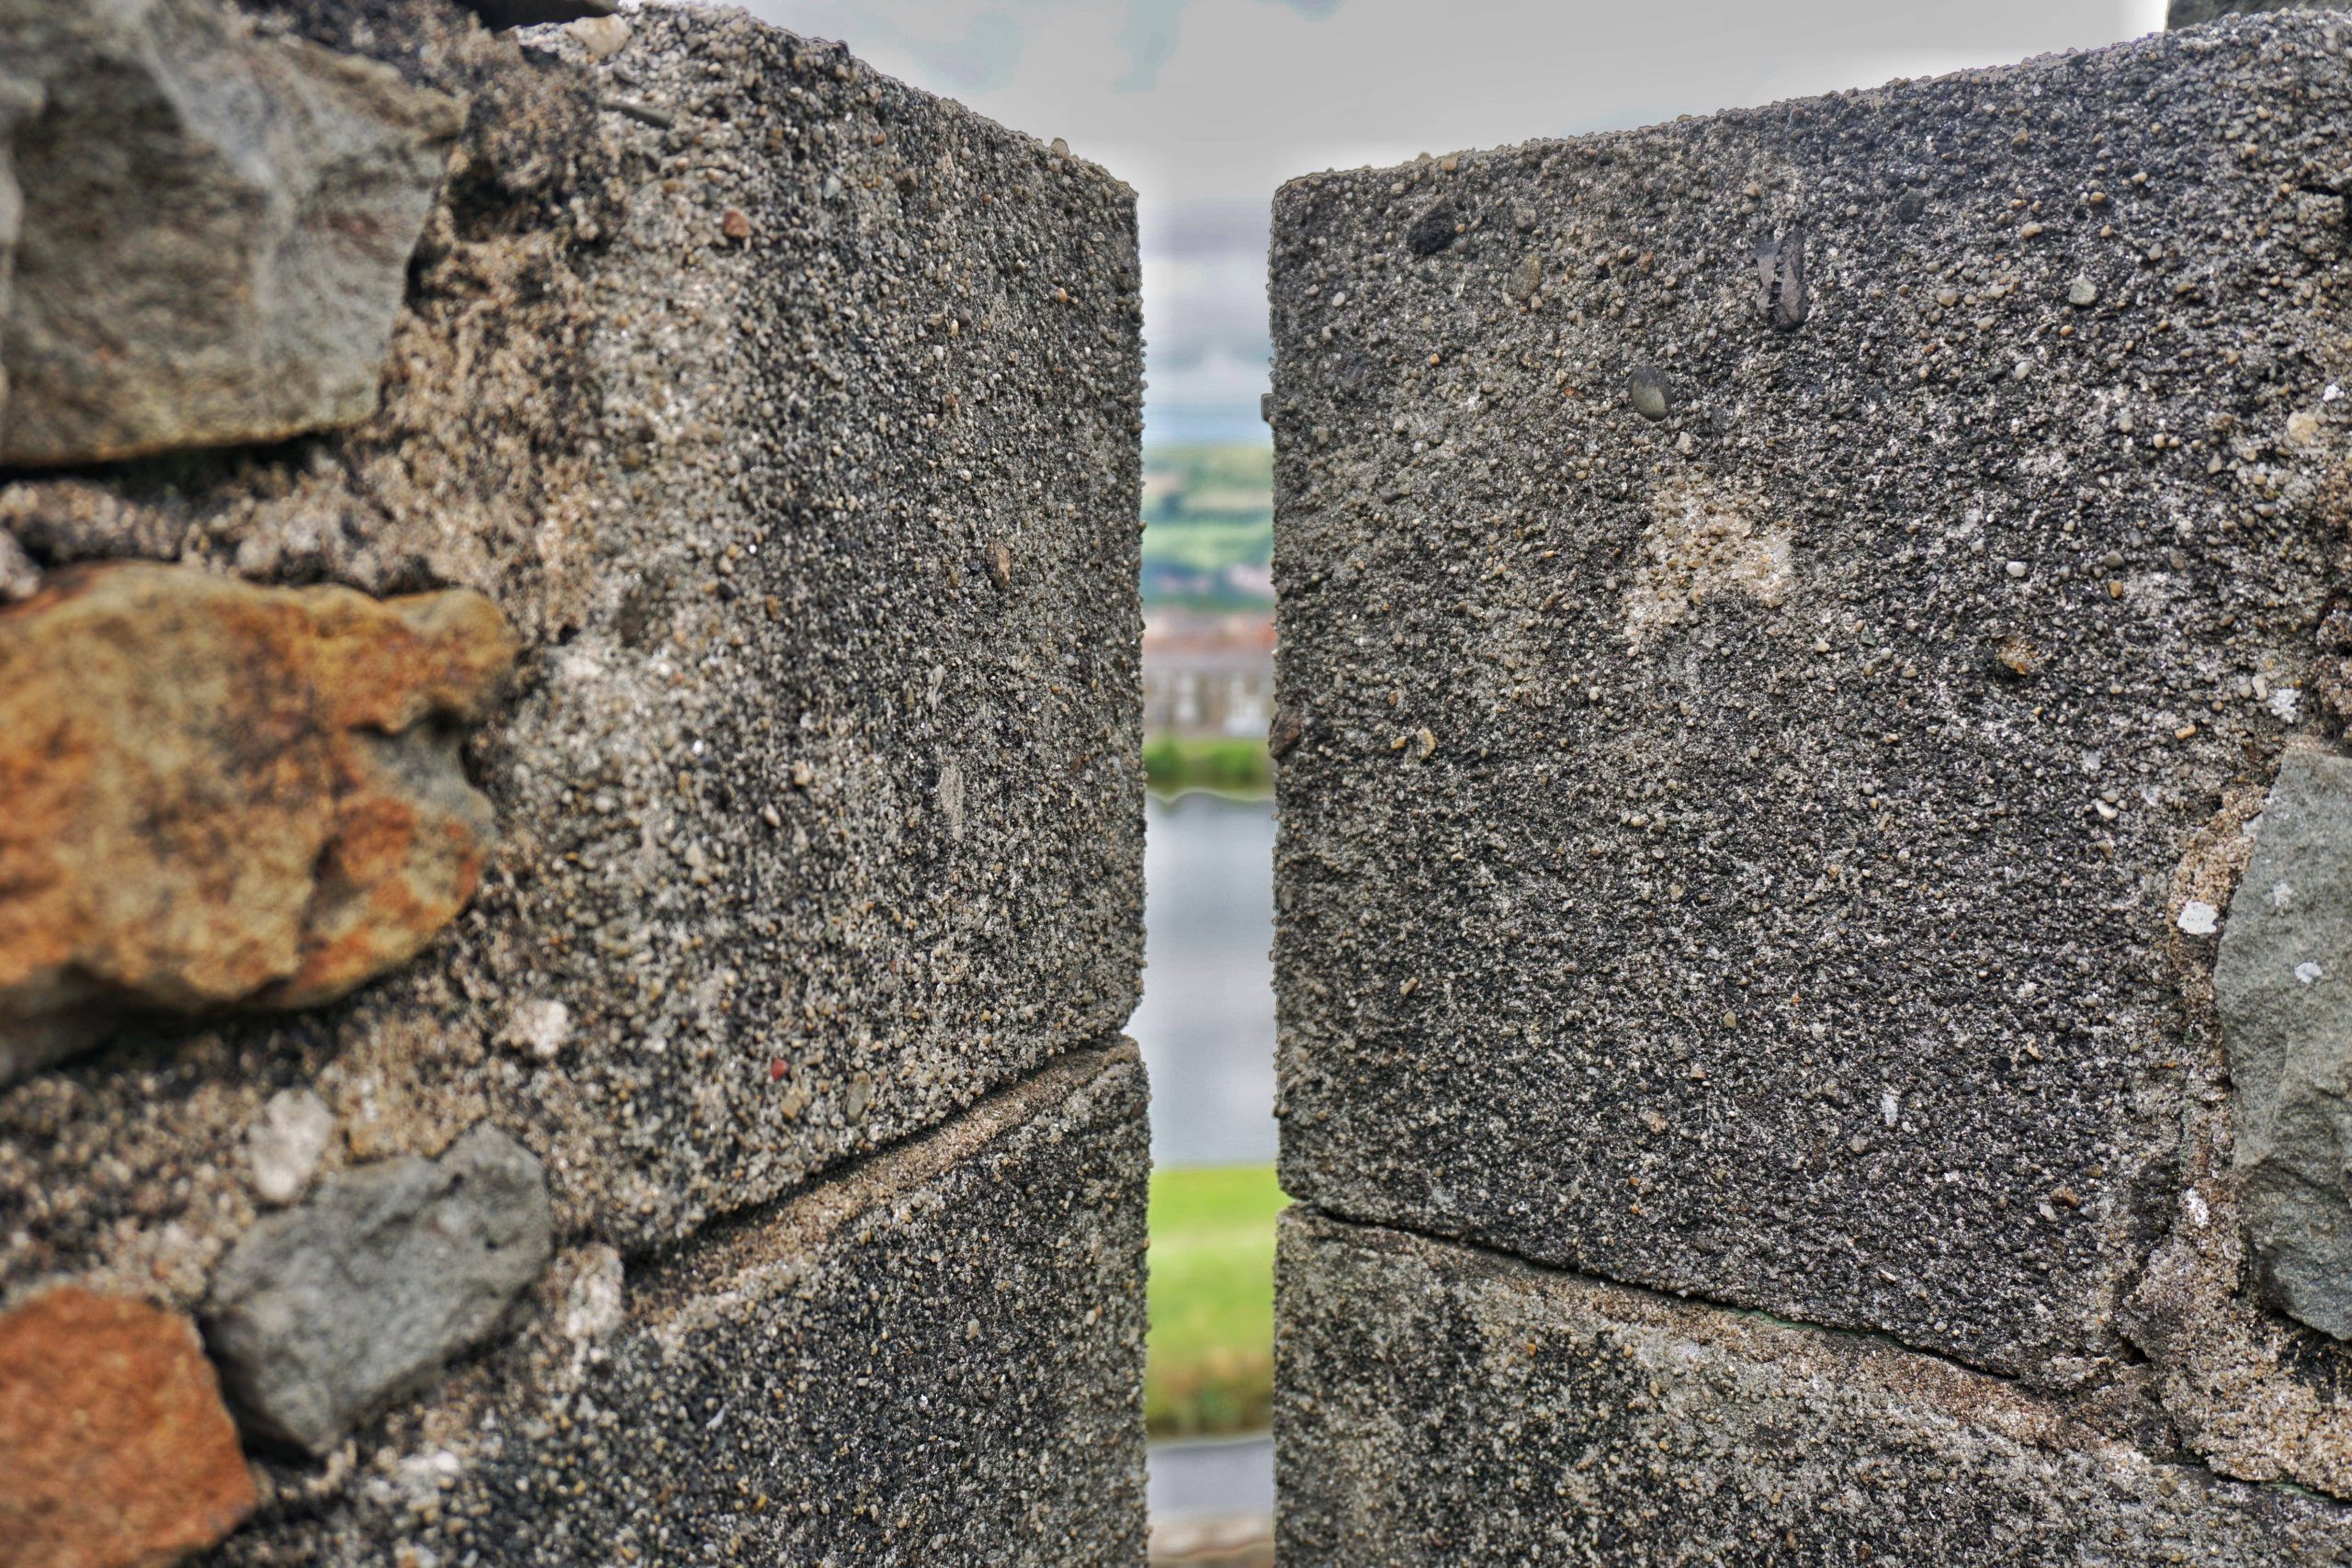 Caerphilly Castle arrows slits